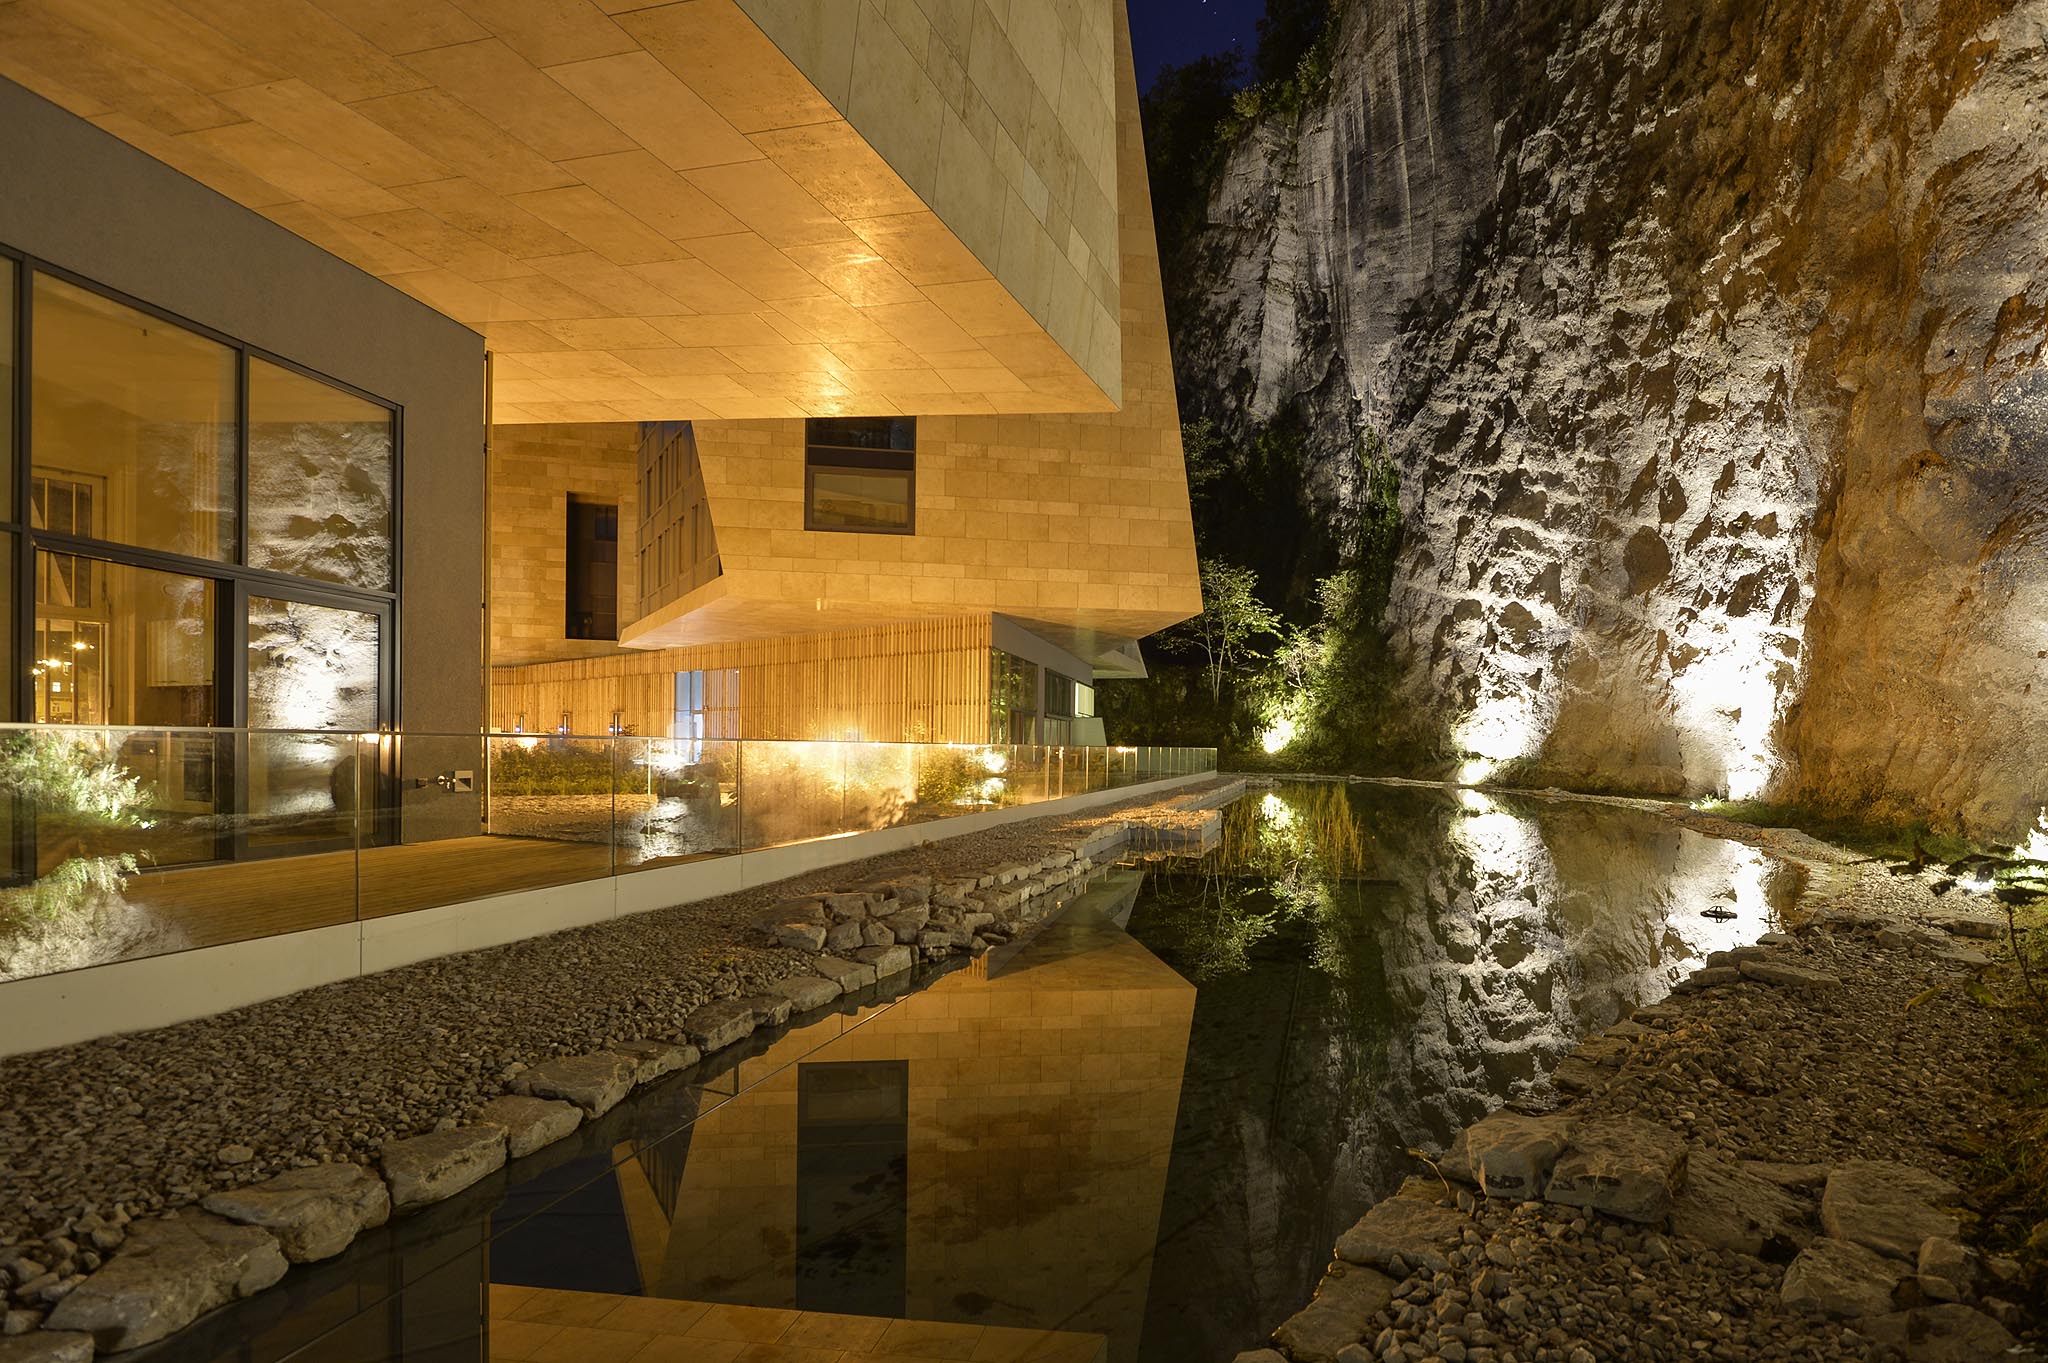 23 Night View of Building C ground floor terrace with water and rock face.jpg